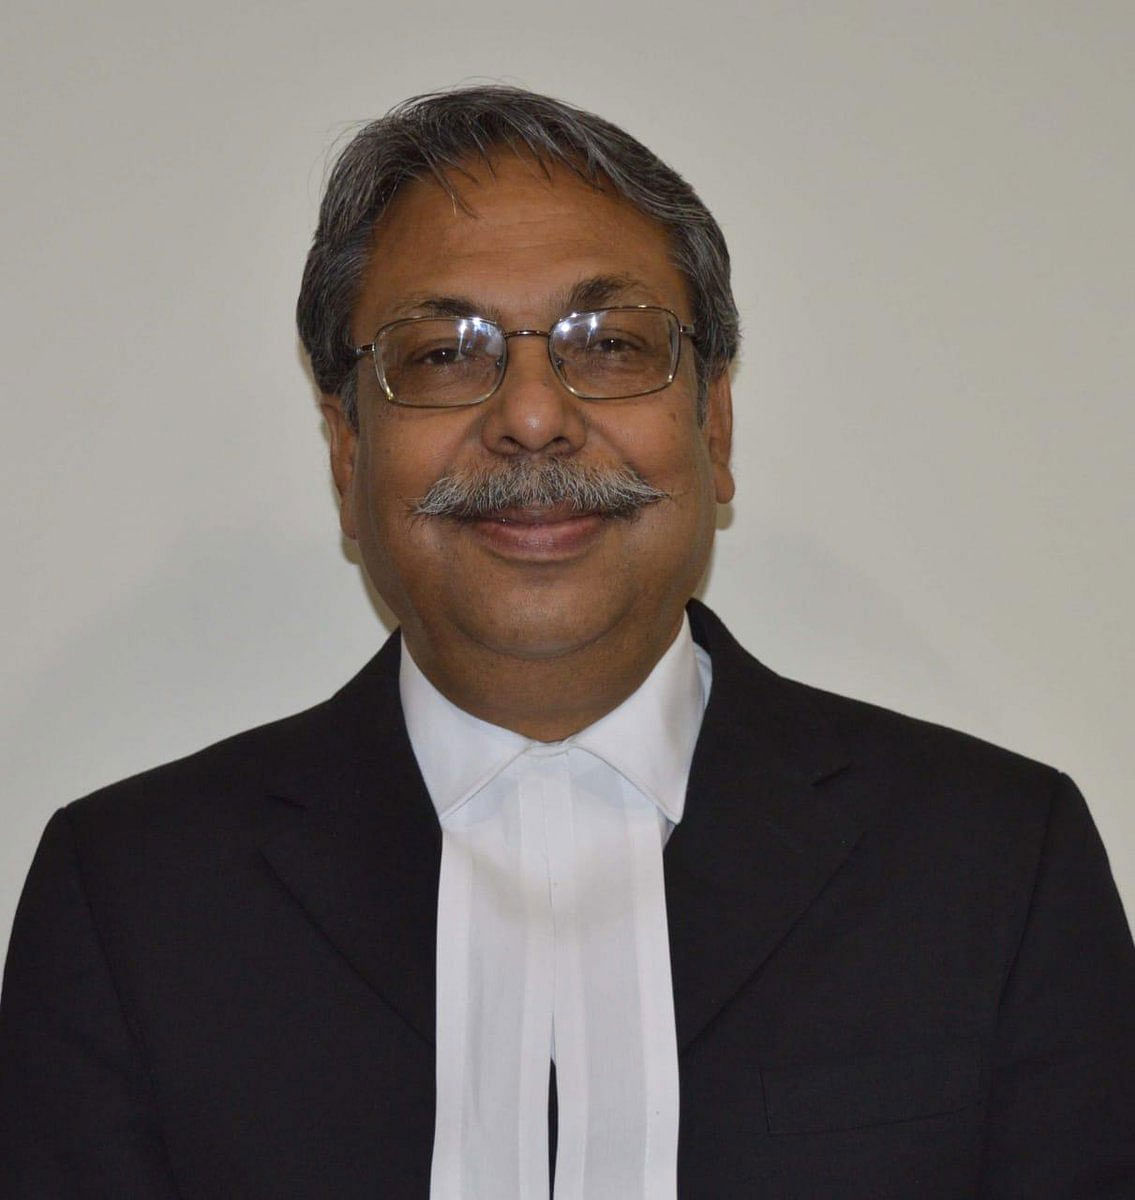 Former Chief Justice of Gauhati High Court Justice Ajit Singh has been appointed as the first Lokayukta of Odisha. Governor Ganeshi Lal approved his name on Saturday following the recommendation of the state government's selection committee last month, a senior official said. ANI photo